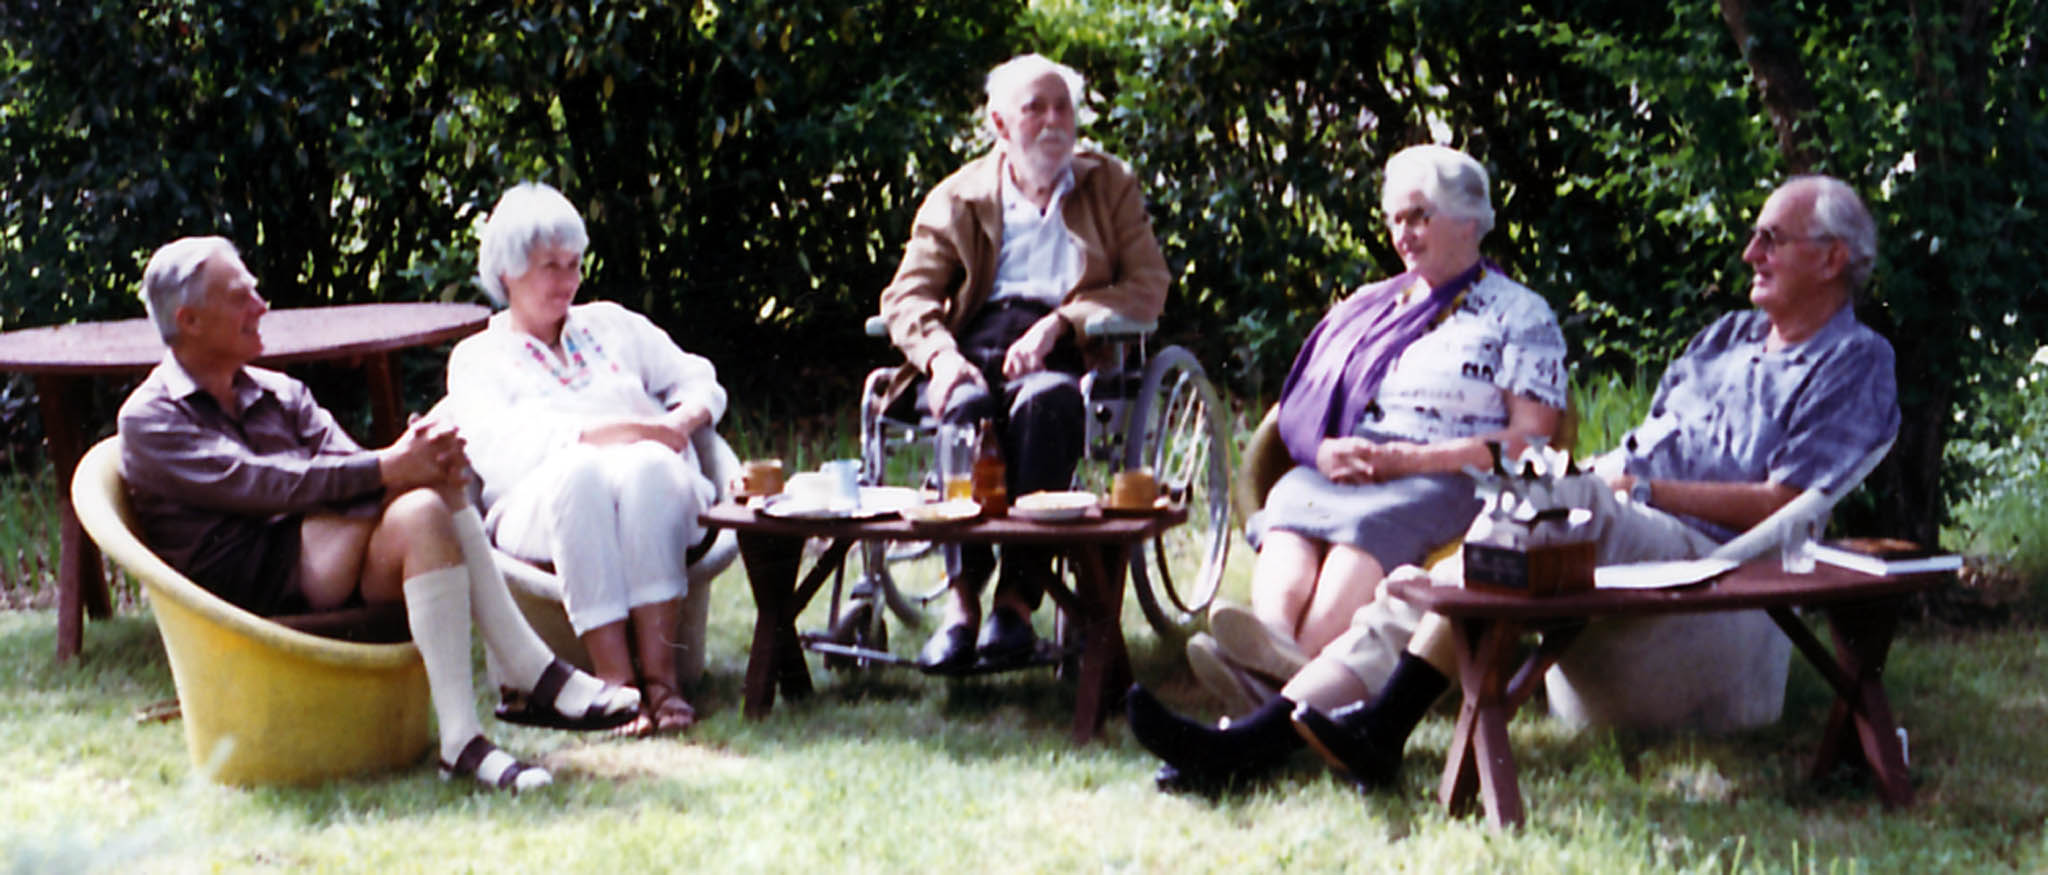 Derek, Maxine, Fred, Phyllis and Ross Hohnen in the garden of their home at 71 Empire Cct. Forrest around 1990. (Puss, Fred’s wife, died in 1989 and Fred died in 1990 so this photo was quite timely. Ross died in 2003. The sculpture on the table near Ross was designed by me and presented to him by Dr H.C. Coombs in 1975 when Ross retired from ANU. It was typical of Ross’s thoughtfulness to bring the presentation sculpture out for this informal occasion. I’m glad we took that photograph – it was a unique and momentous meeting.